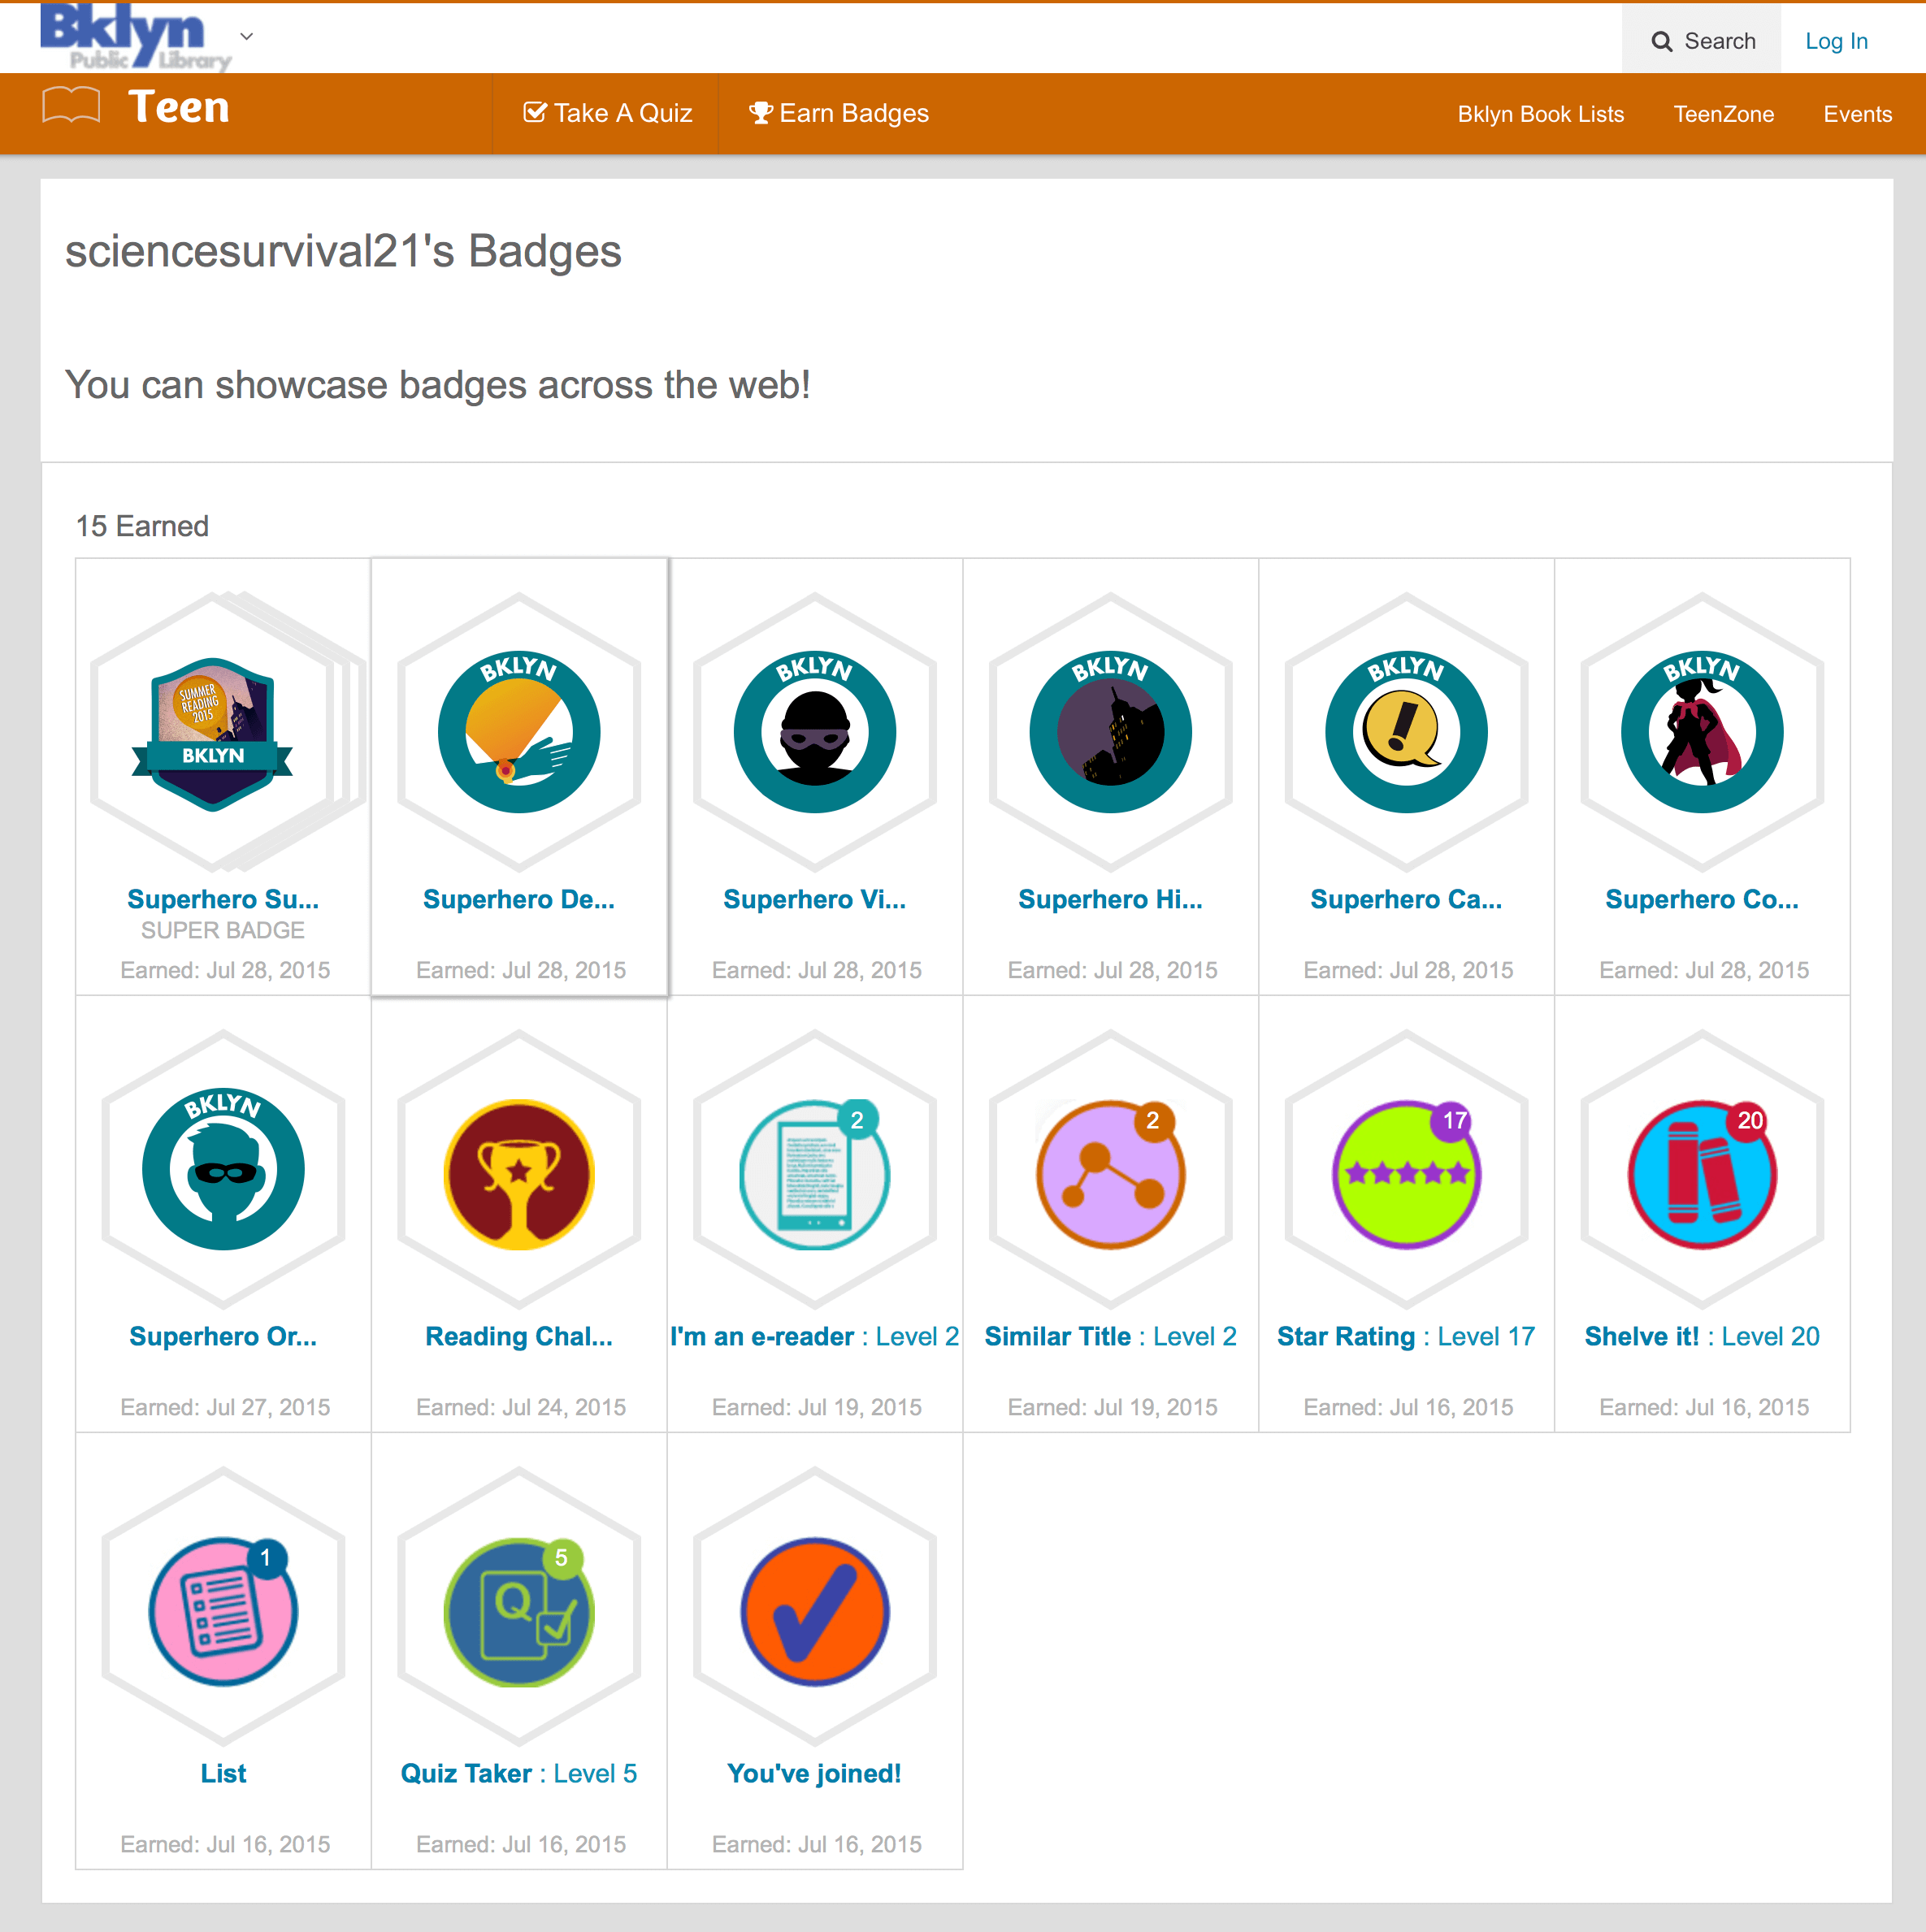 One user's earned badges in a summer site